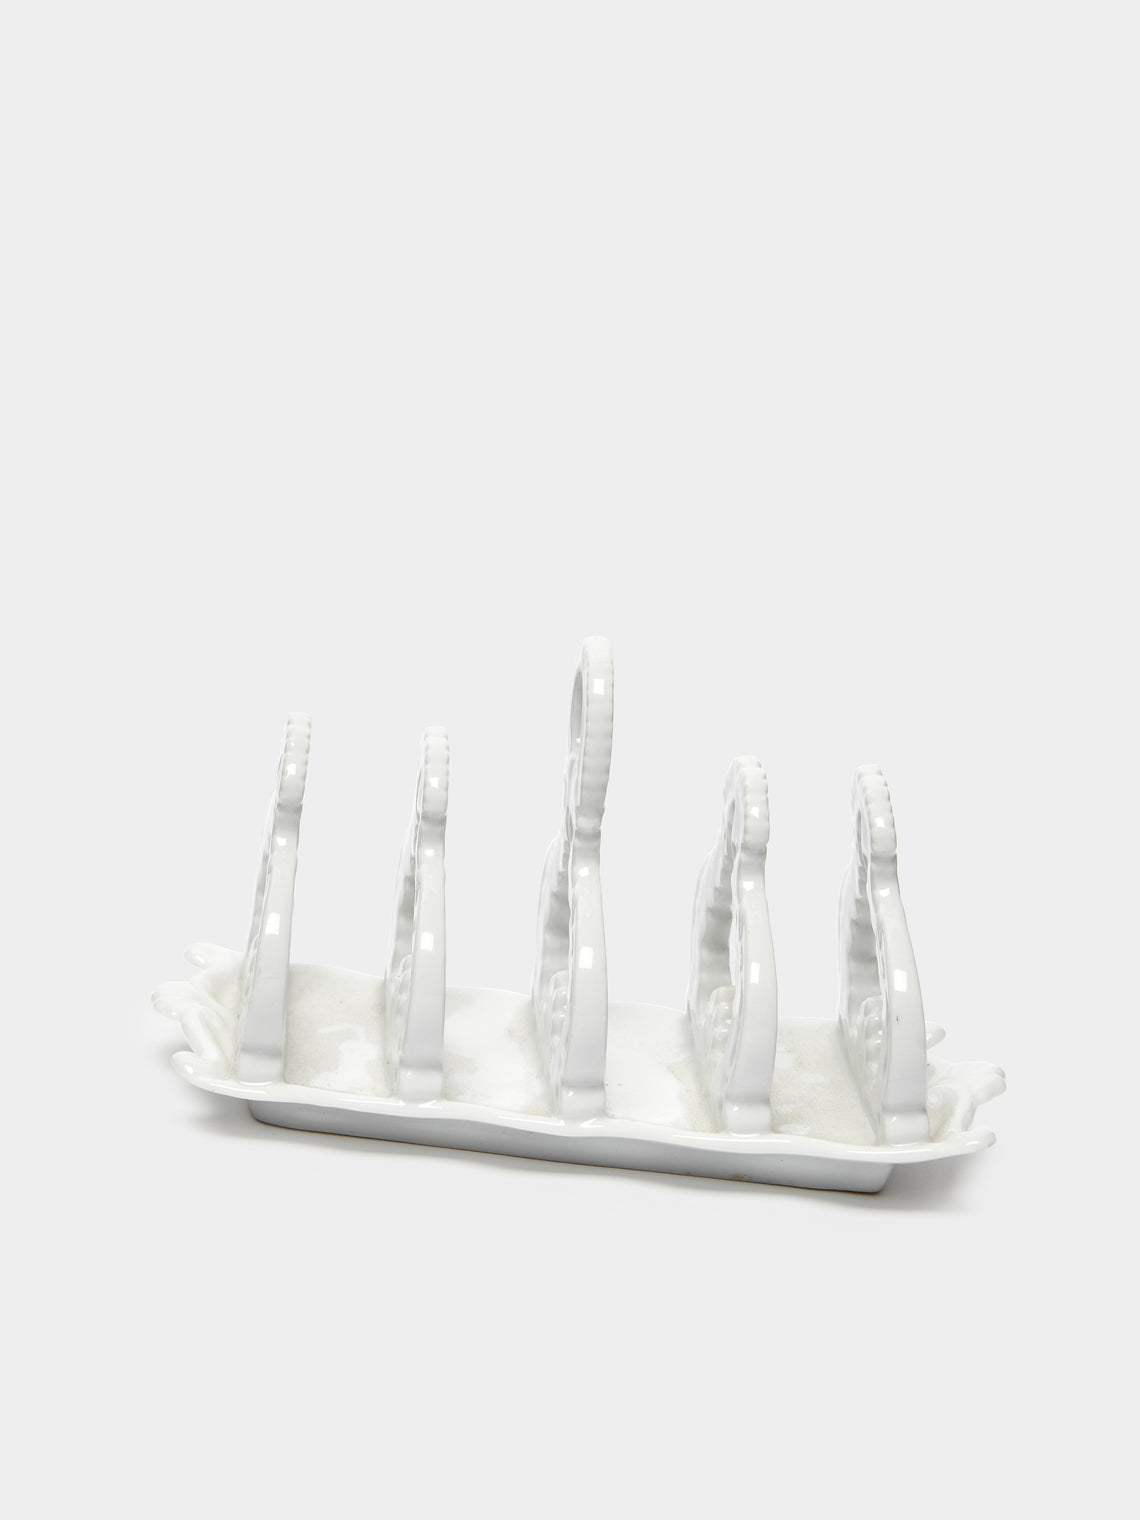 Antique and Vintage - 1930s Shelleyware Toast Rack -  - ABASK - 